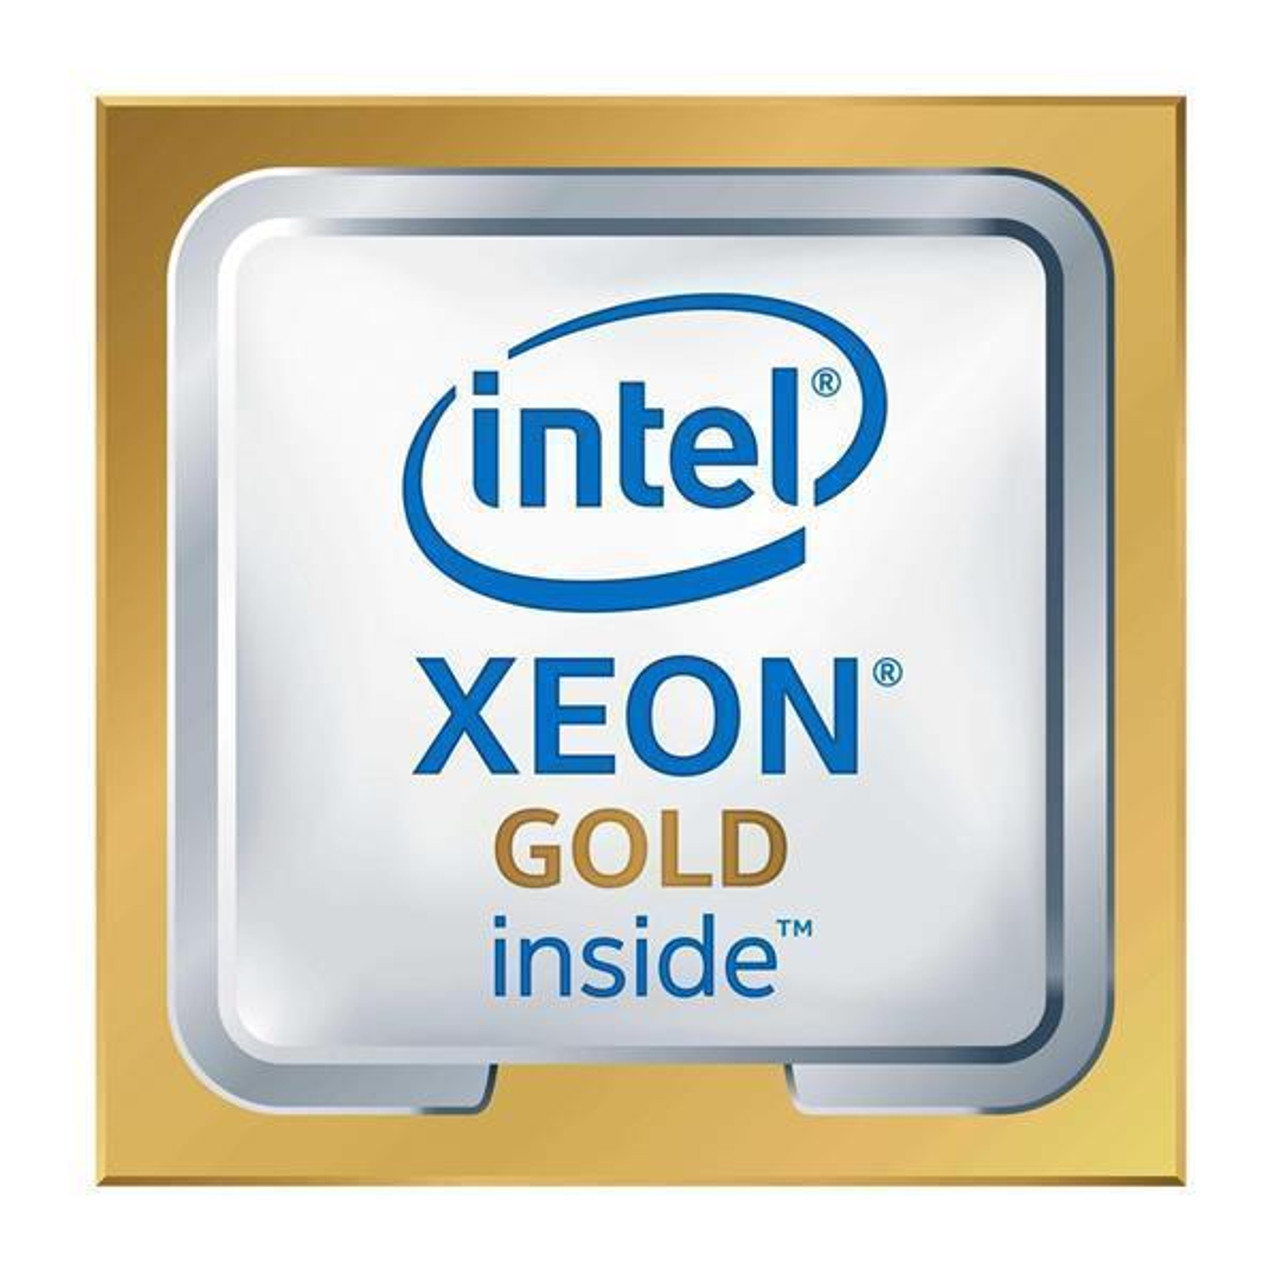 HPE 2.20GHz 42MB L3 Cache Socket FCLGA4189 Intel Xeon Gold 6330N 28-Core Processor Upgrade for Edgeline E920